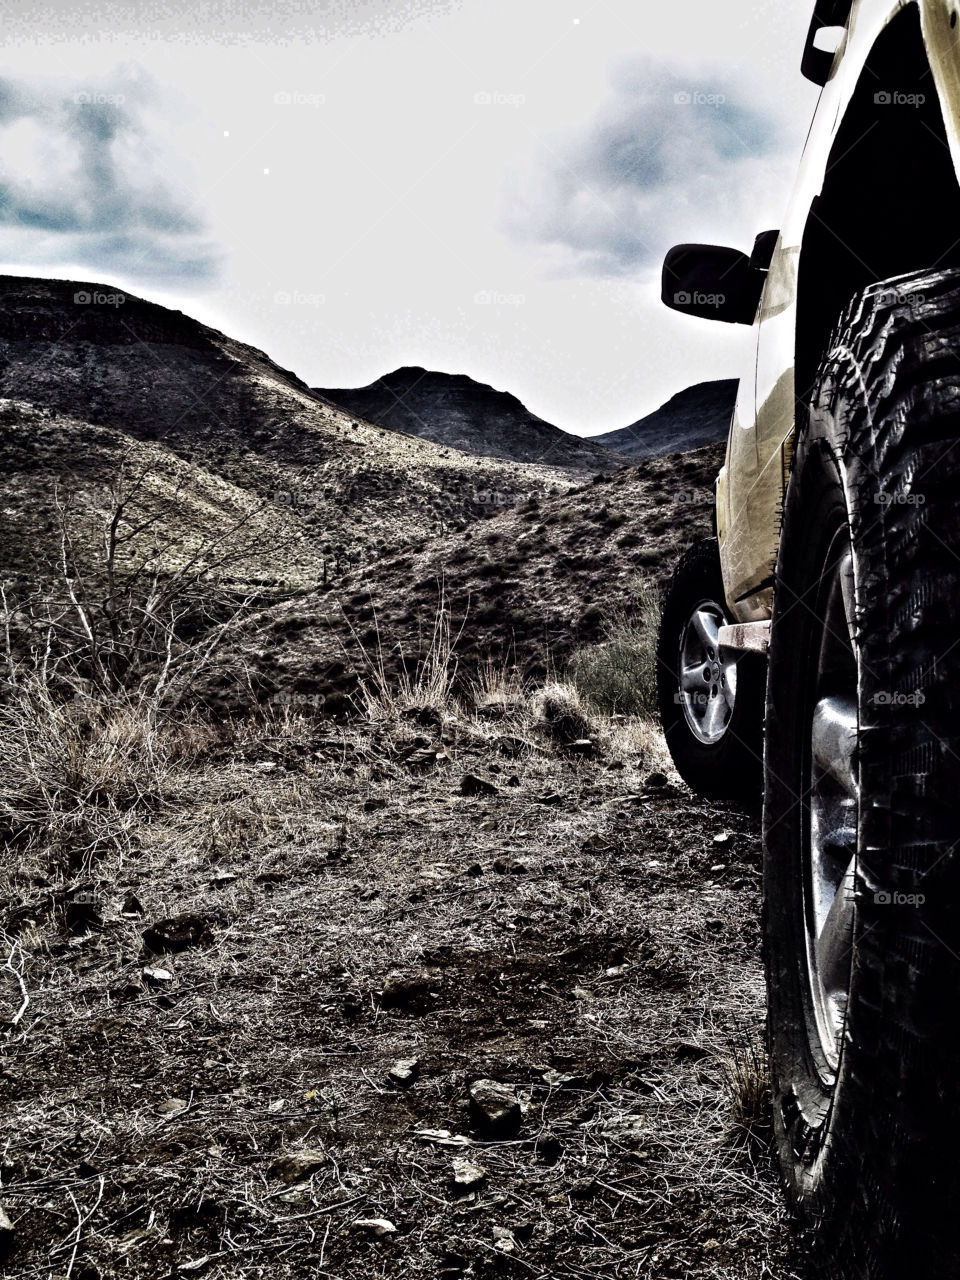 seven springs az trail off road by mjf101471